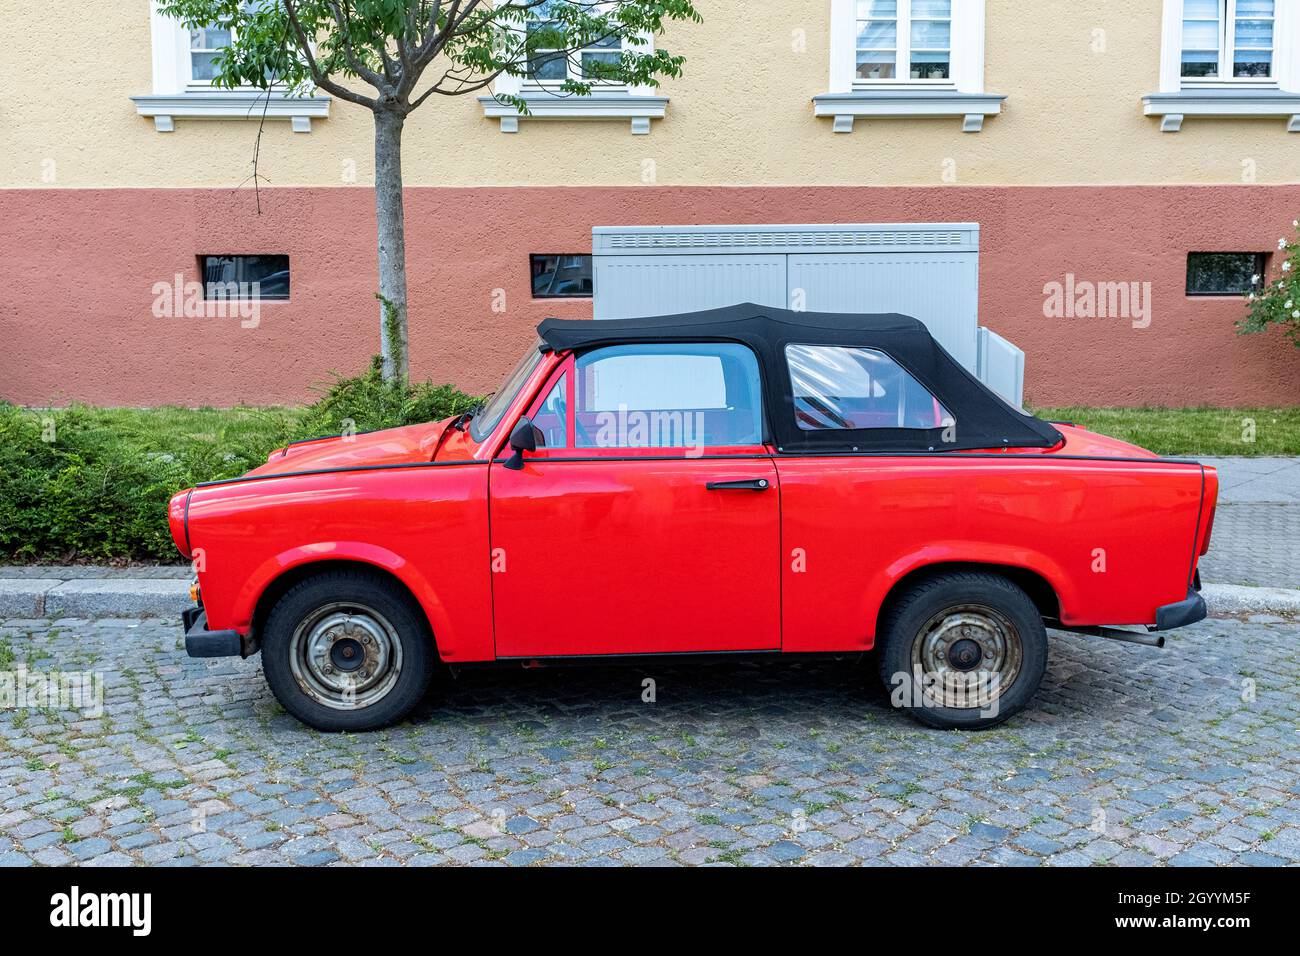 Frankfurt Oder, Germany. Totally refurbished DDR / GDR / East-German Trabi Cabriolet Car with red paint job. Trabi's are now a culture thing. Stock Photo